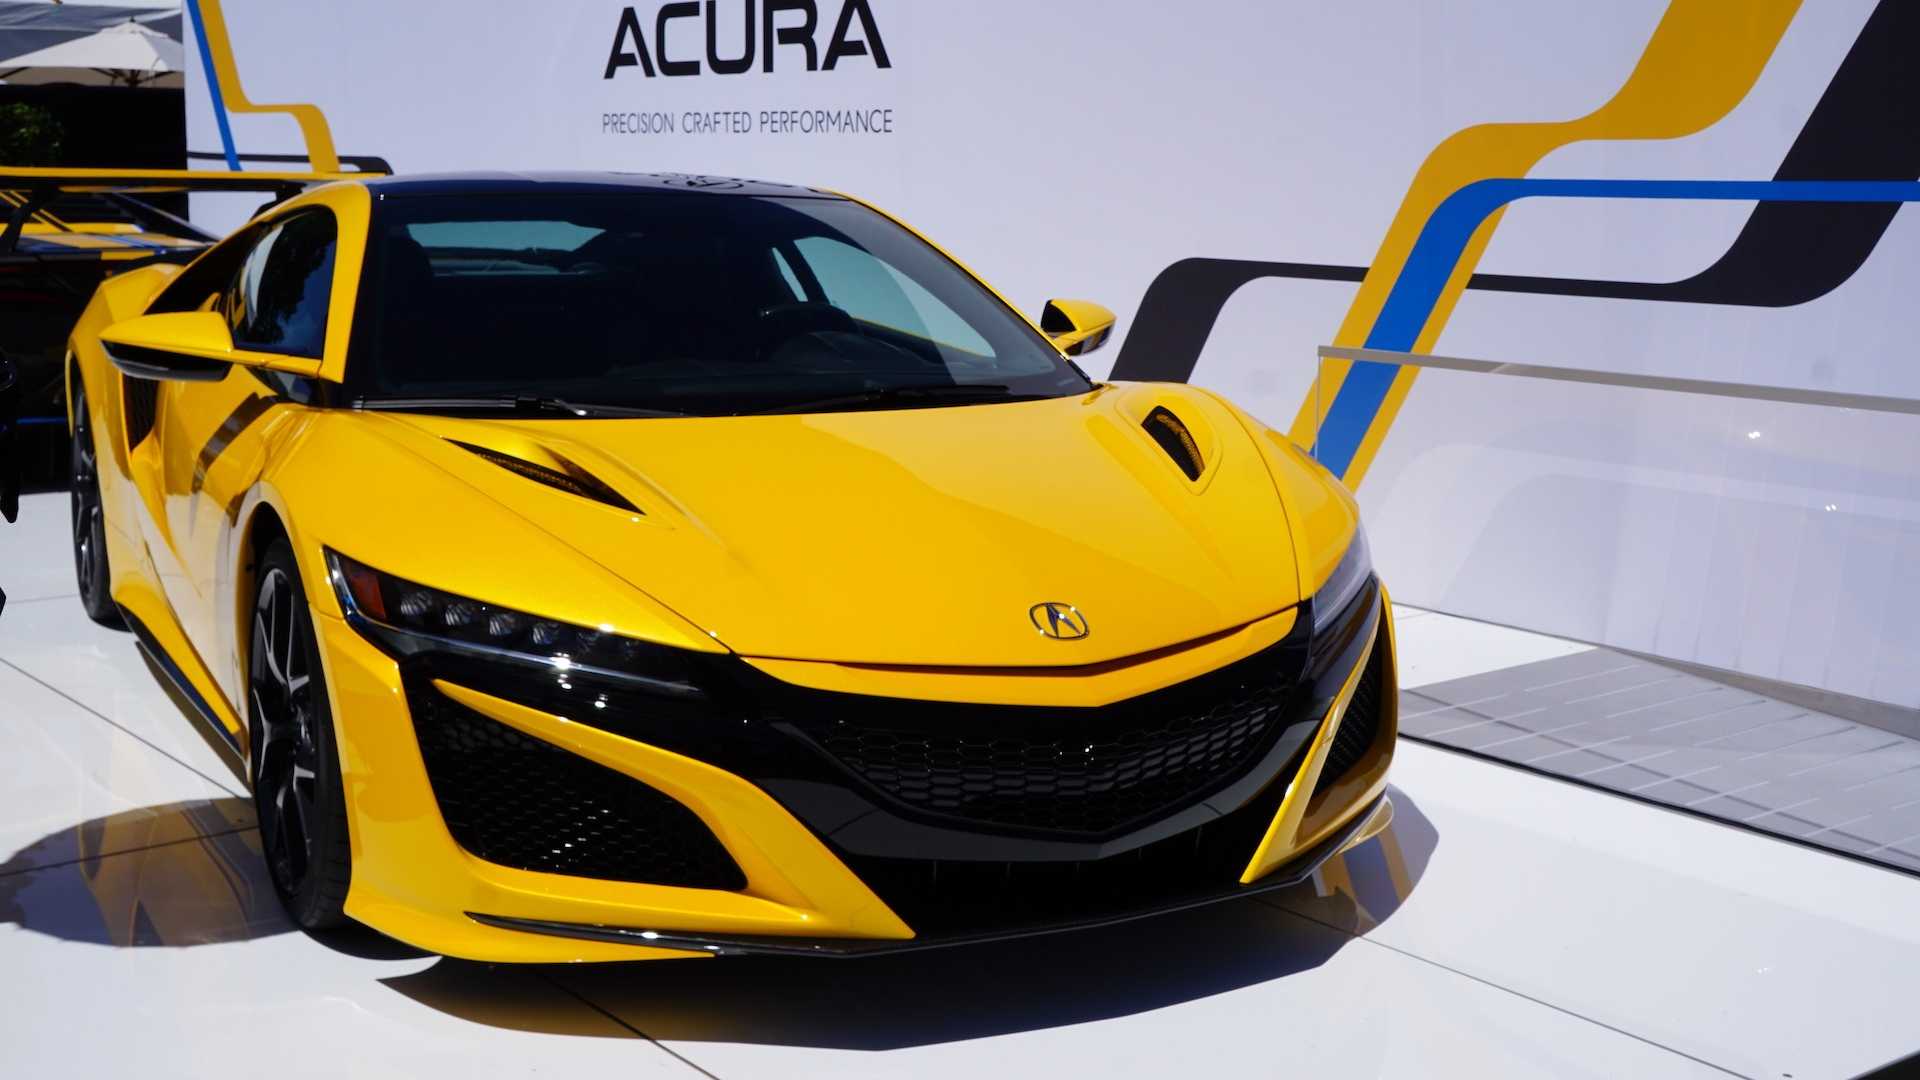 2020 Acura NSX Indy Yellow Pearl Pebble Beach